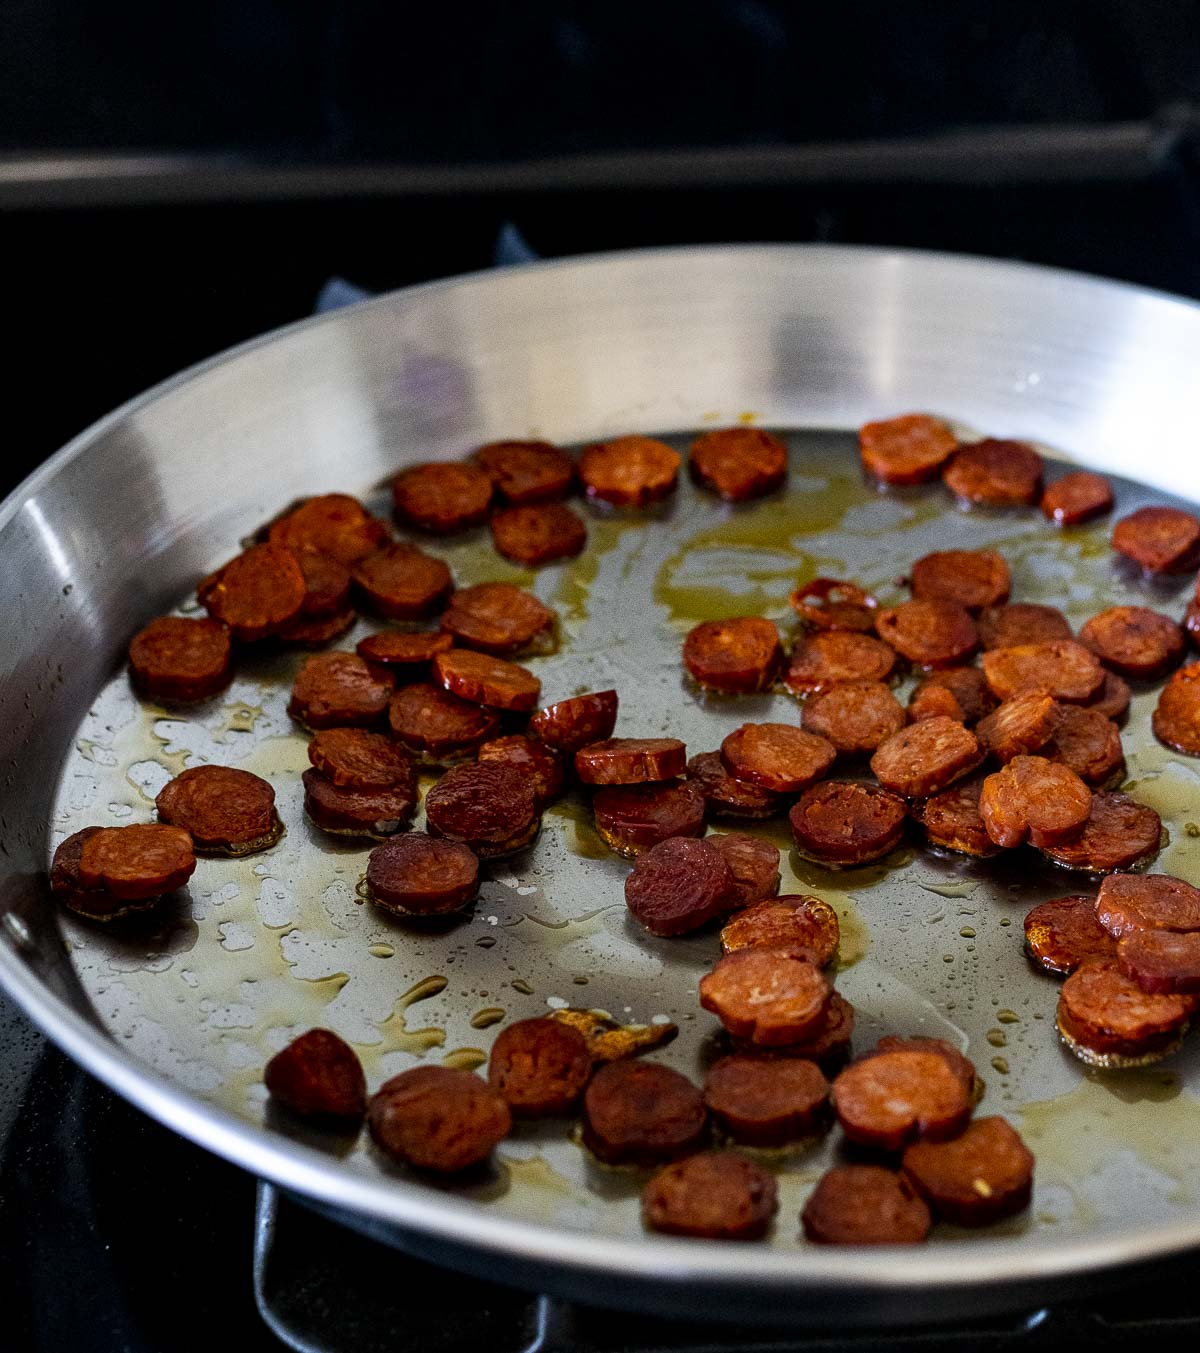 Chorizo being browned in a paella pan.